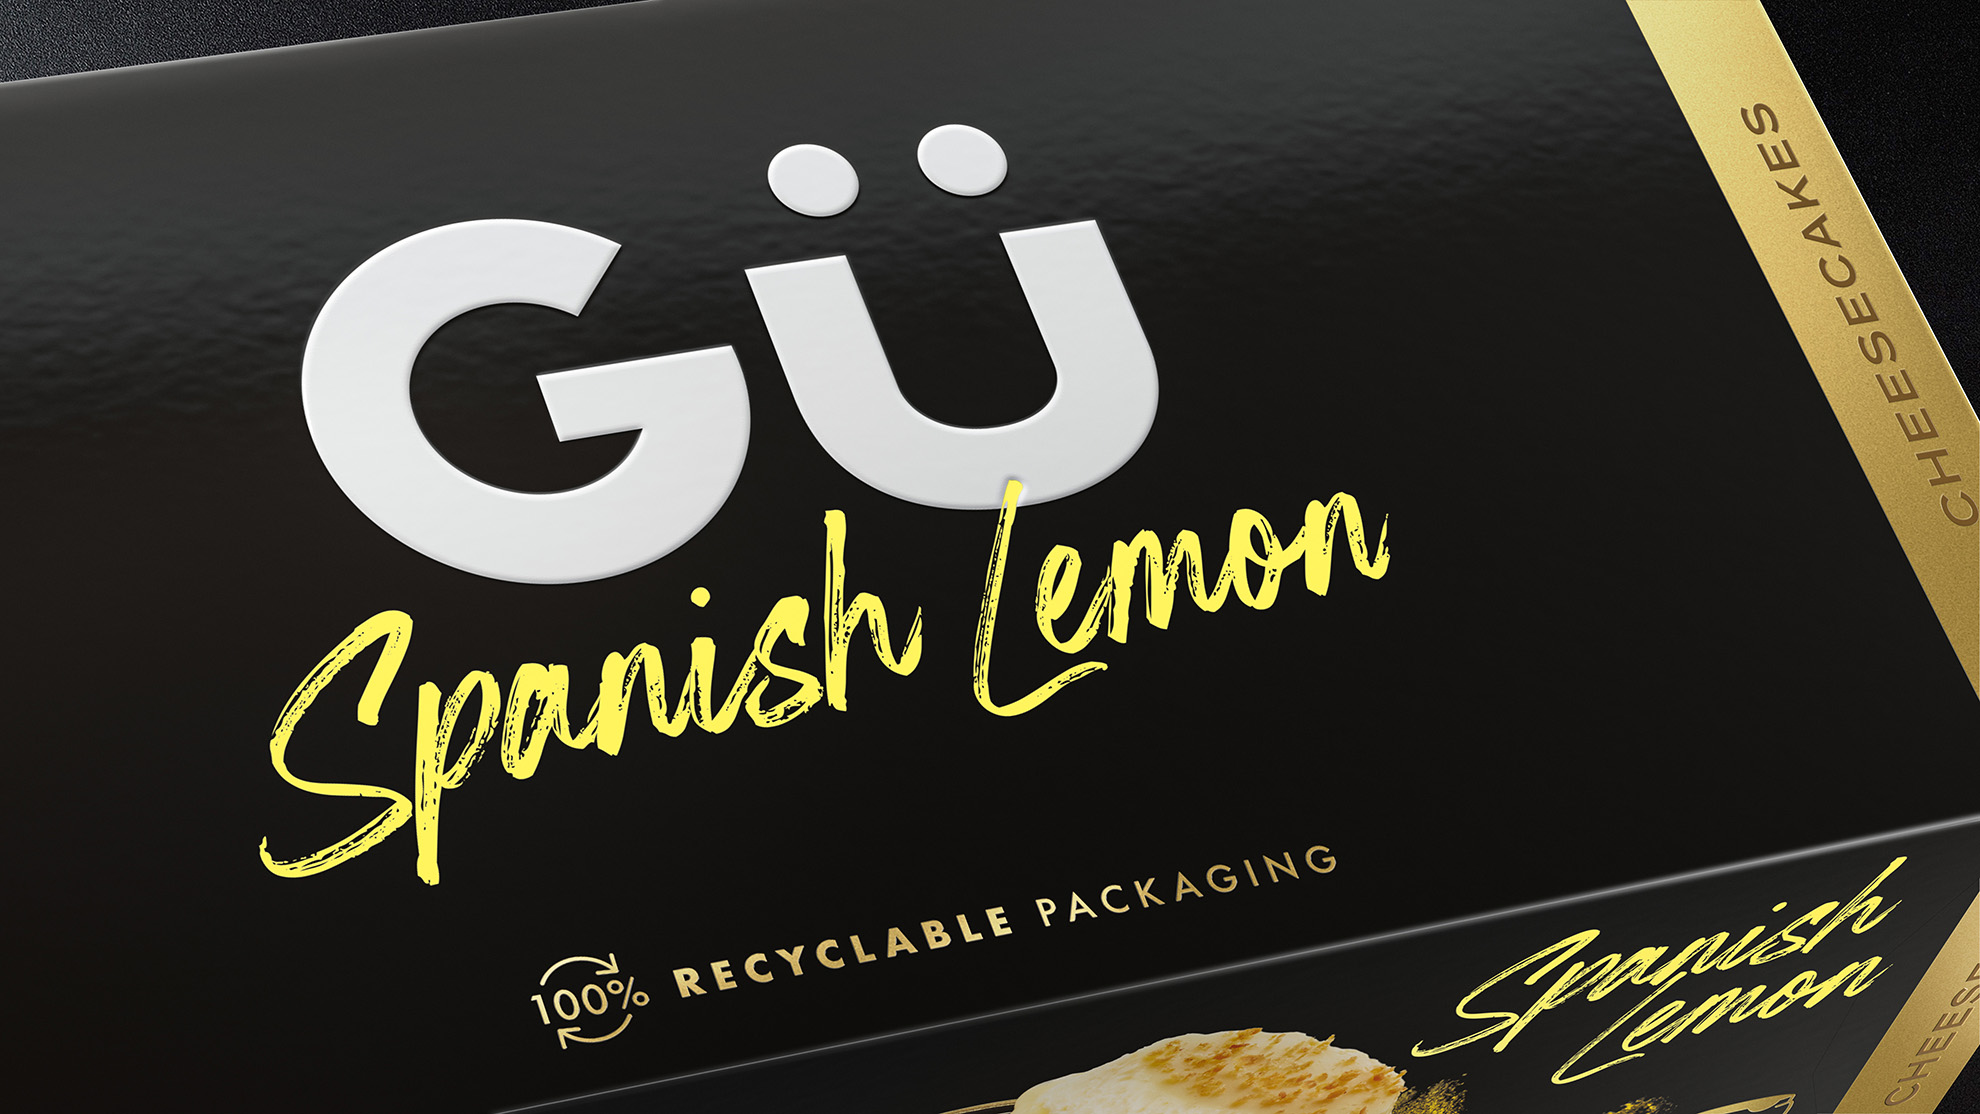 Outlaw’s Global Redesign for Gü Puds Delivers Indulgence by the Spoonful